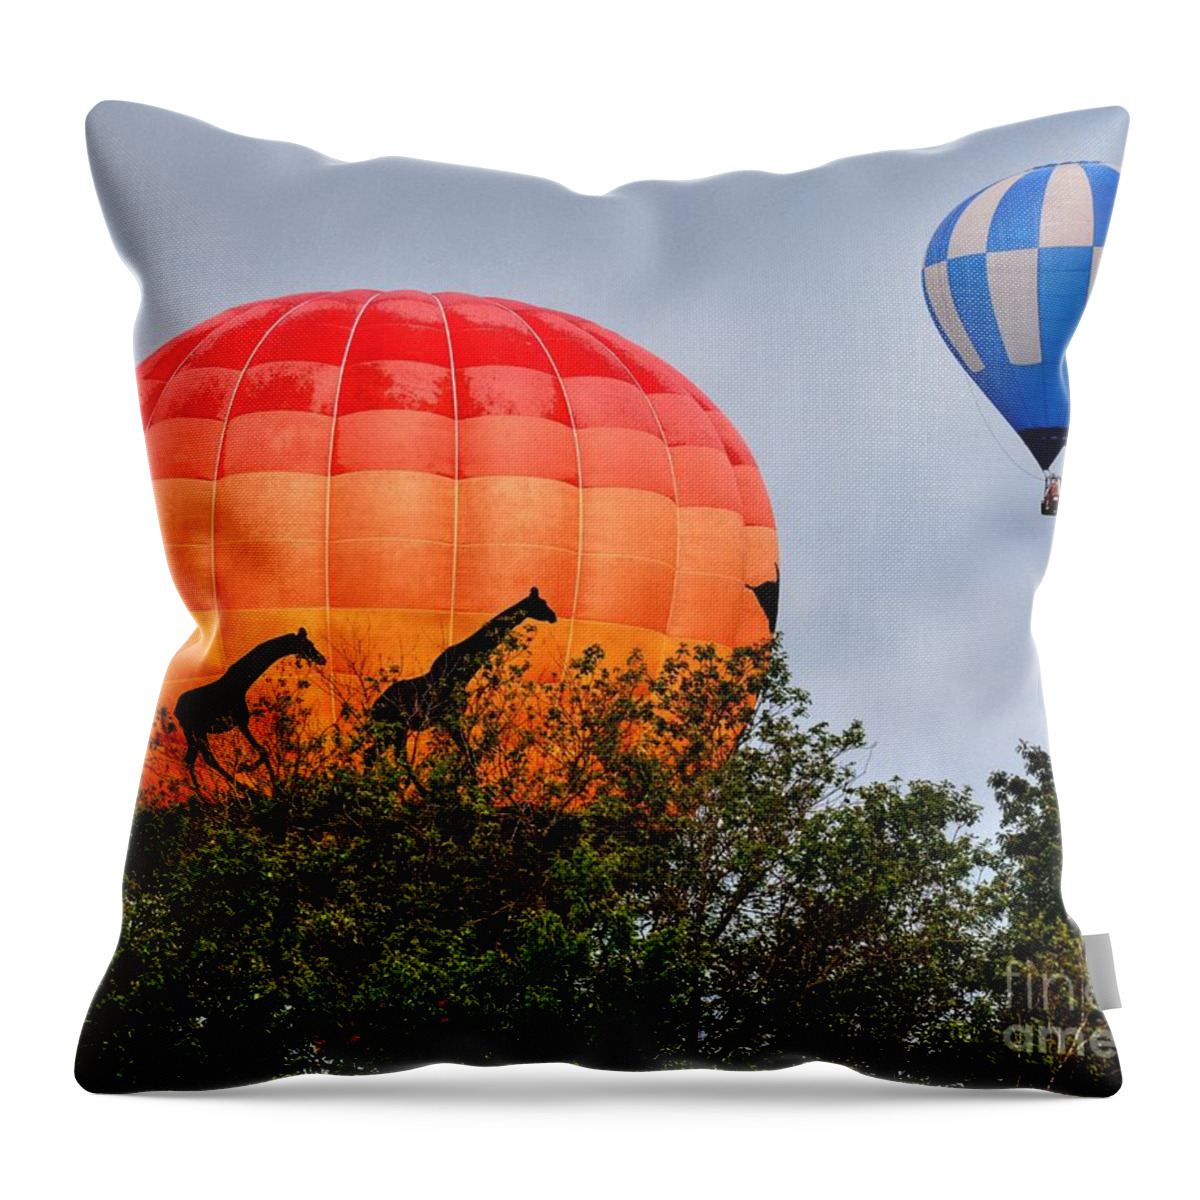 Giraffes Throw Pillow featuring the photograph The Giraffes Are Coming by Steve Brown